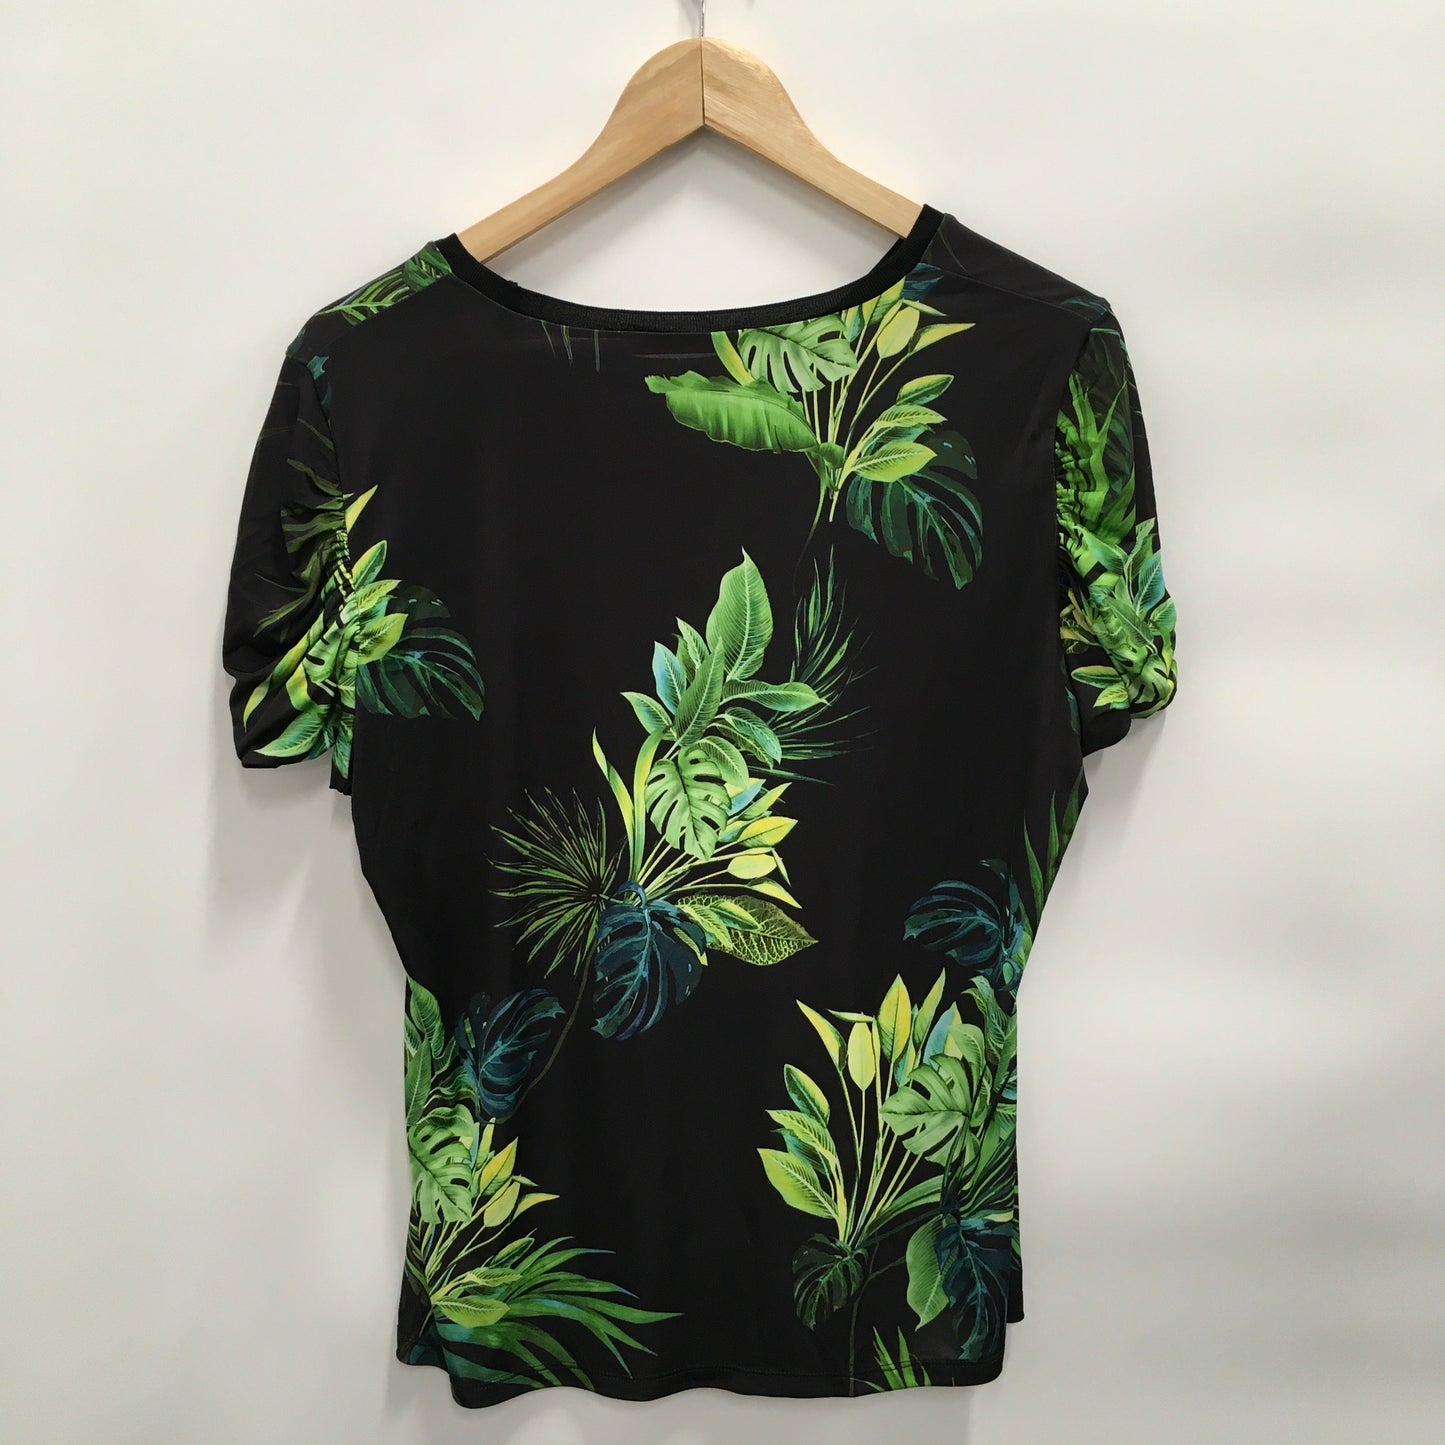 Top Short Sleeve By Elie Tahari  Size: L